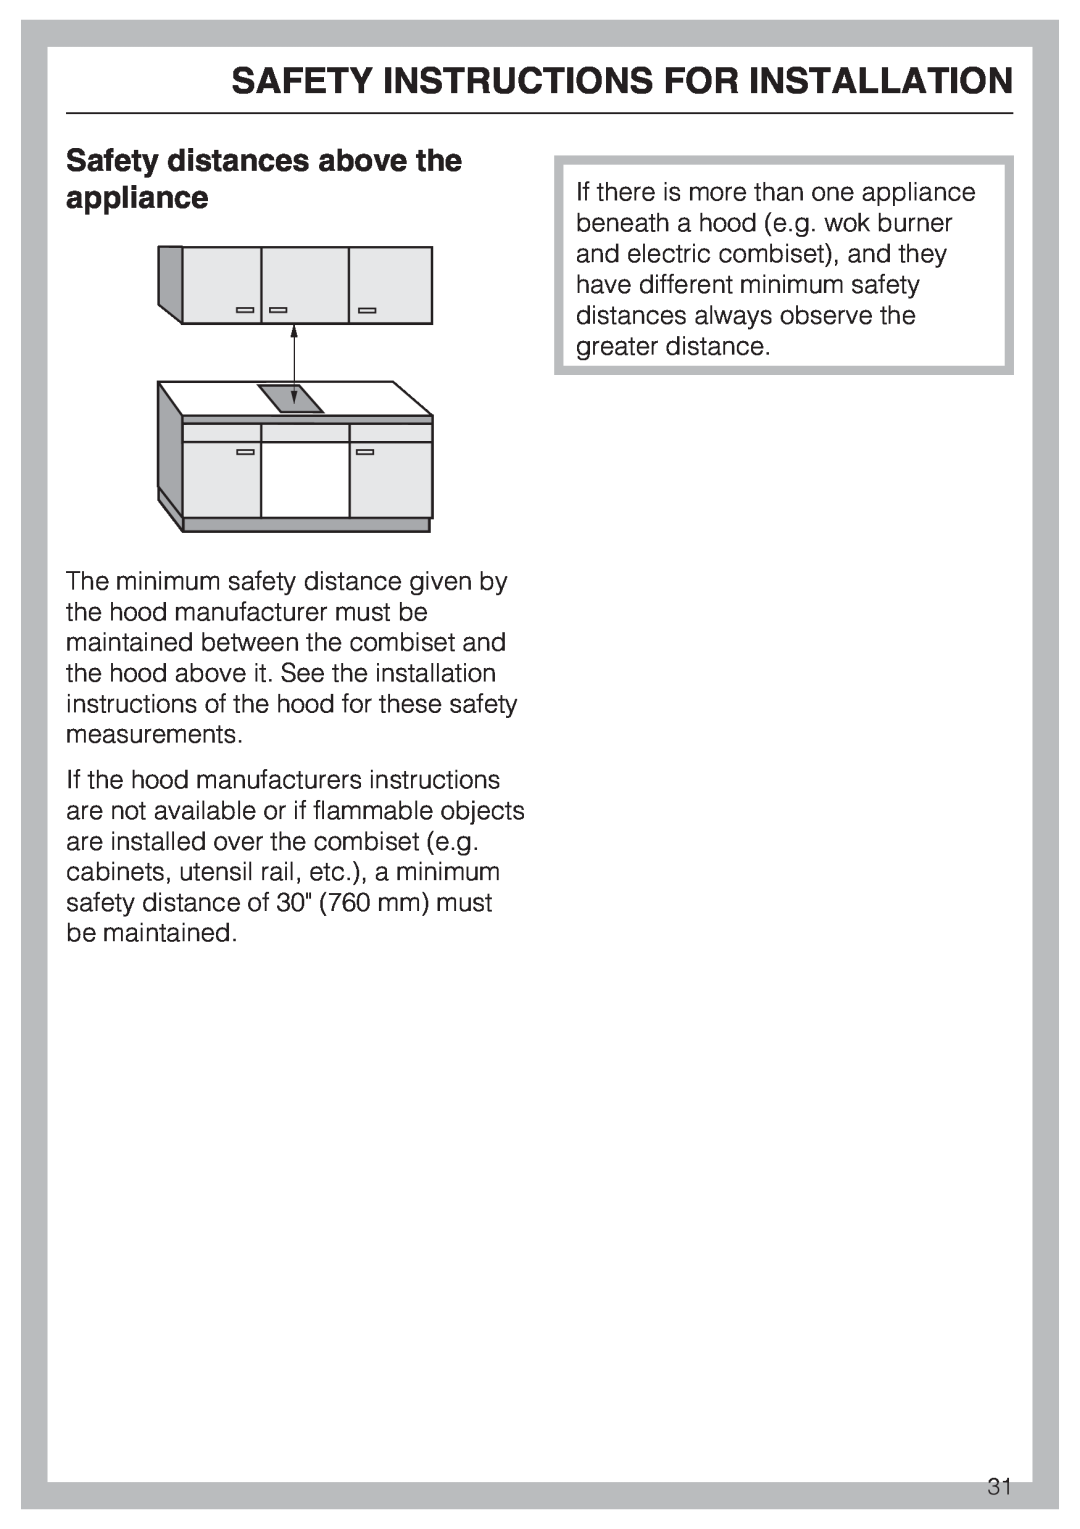 Miele CS1212 installation instructions Safety distances above the appliance, Safety Instructions For Installation 